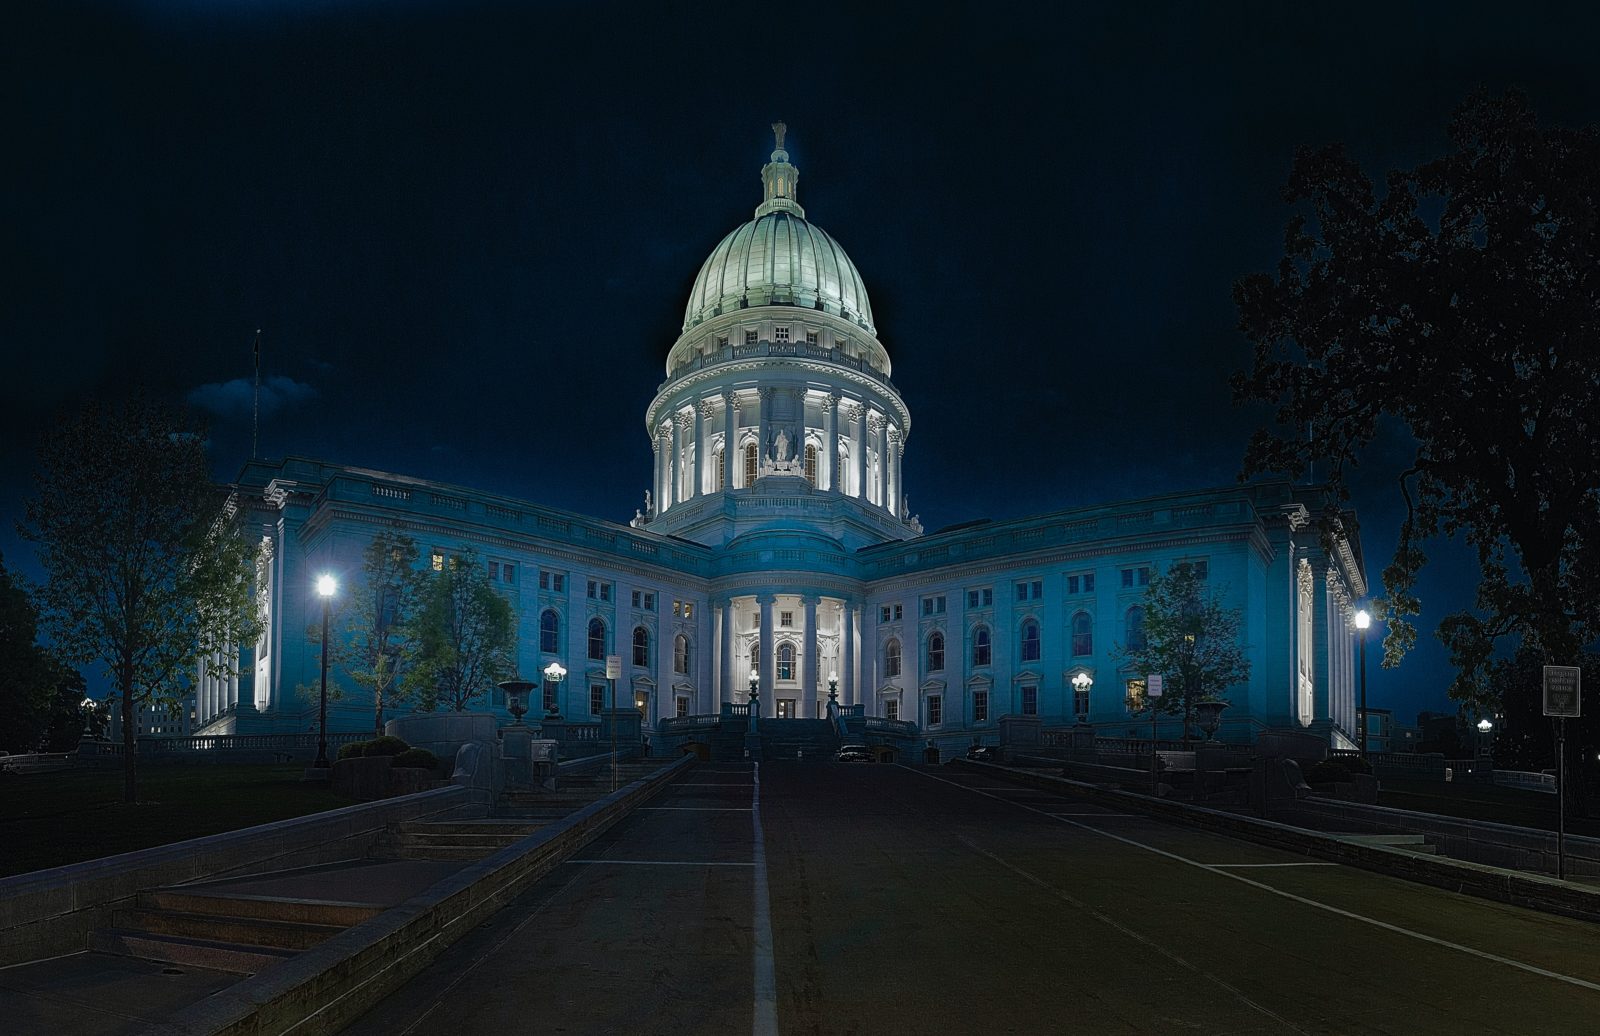 This is a 44 image HDR panoramic image of the Capitol building. This has been downsampled to 4k width so that it’s not stupidly large.I’m playing around with HDR panoramas at the moment and this one turned out pretty well.